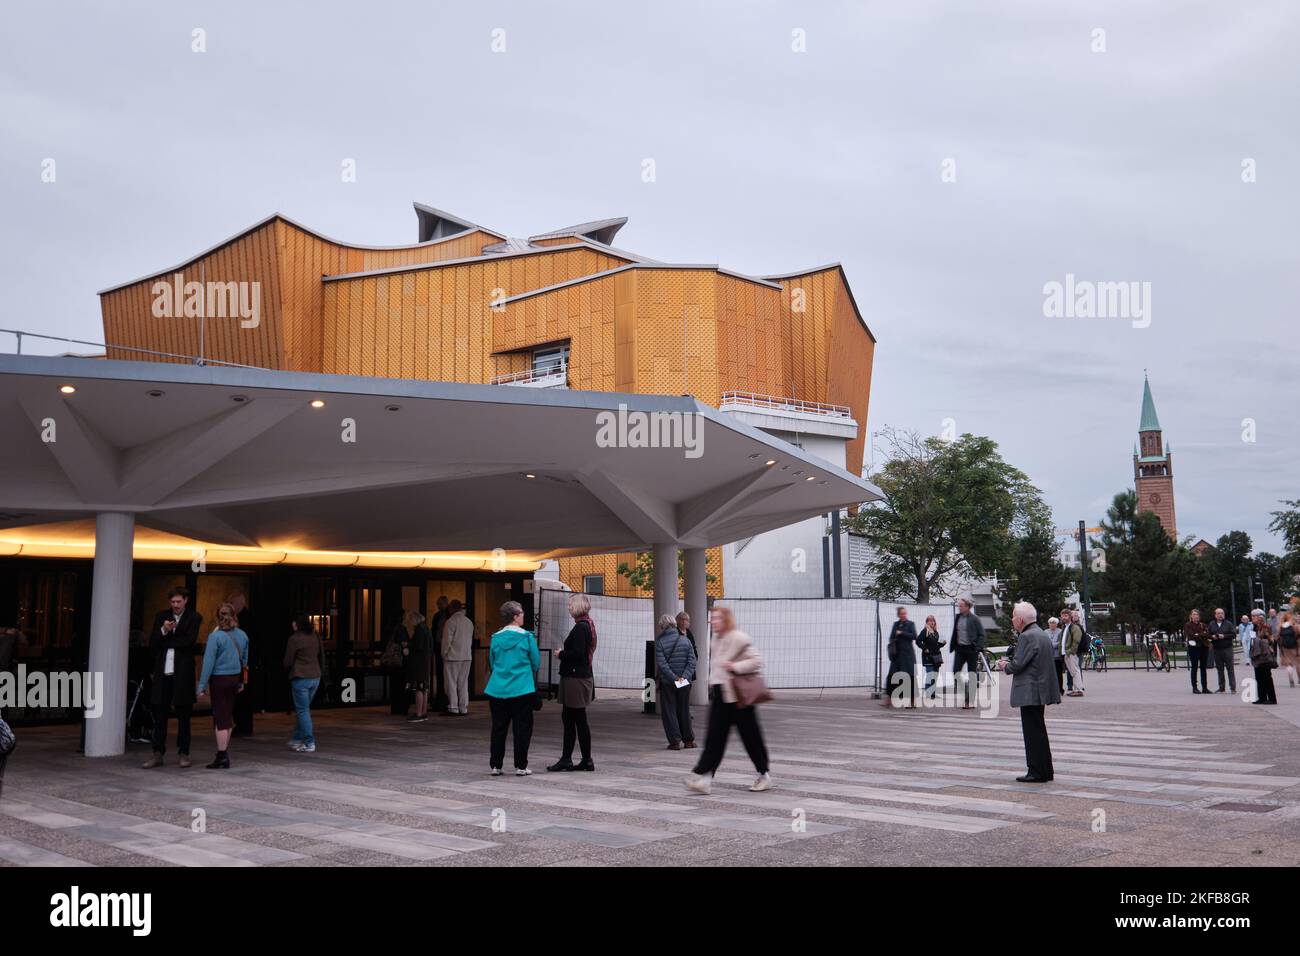 Berlin, Germany - Sept 2022: The Berliner Philharmonie concert hall designed by Hans Scharoun in 1961 is a masterpiece of modern architecture Stock Photo